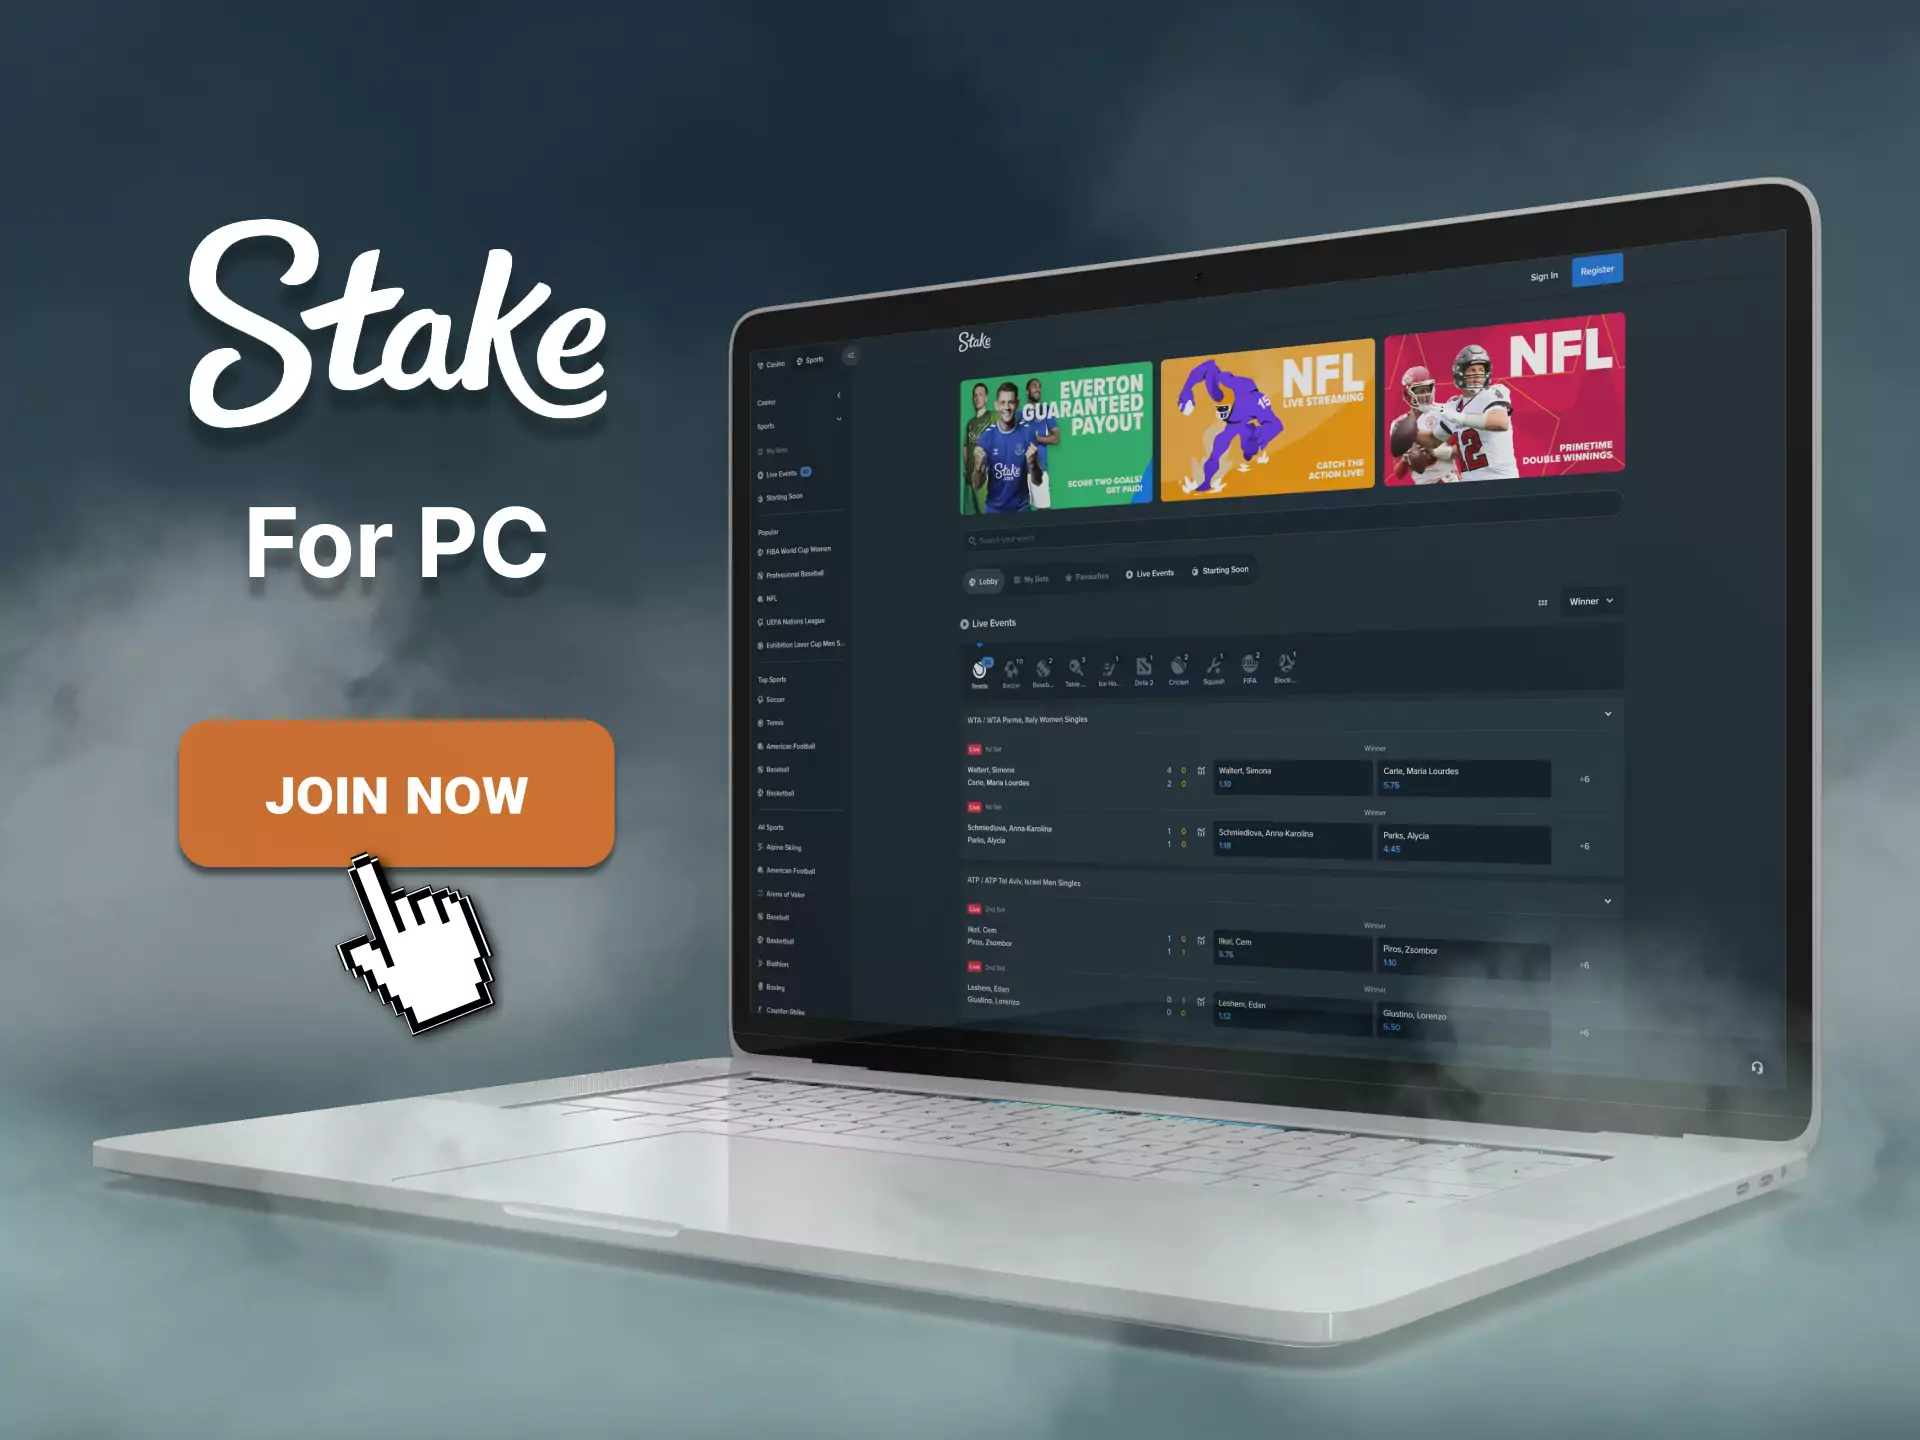 There is no special client for PC yet, but you can use the official website of Stake.